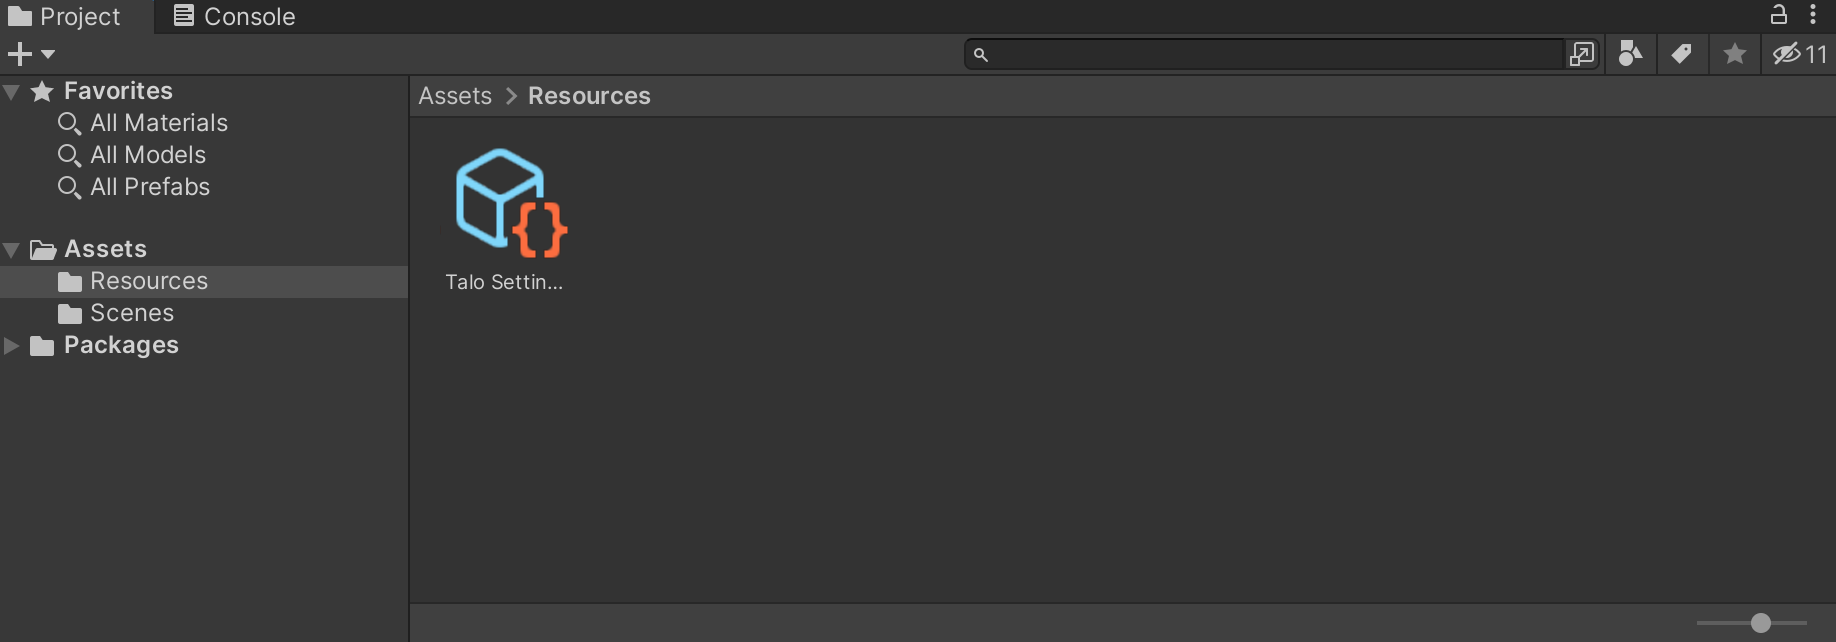 Create a settings asset inside the Resources folder